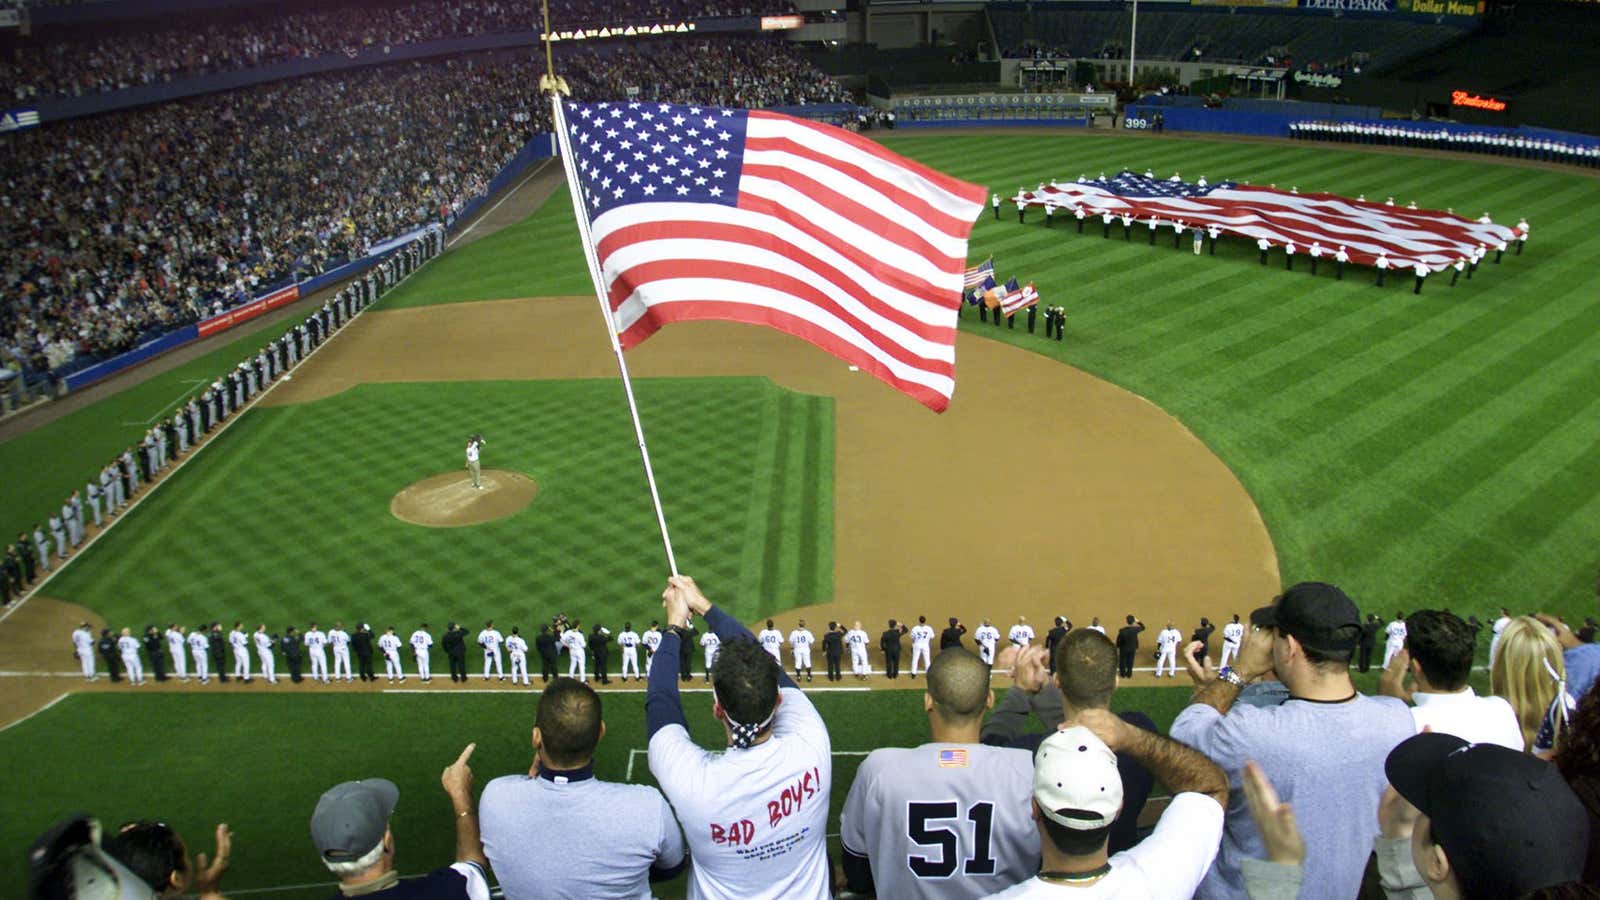 A gripping scene from the first home game for the New York Yankees after the September 11 attacks.